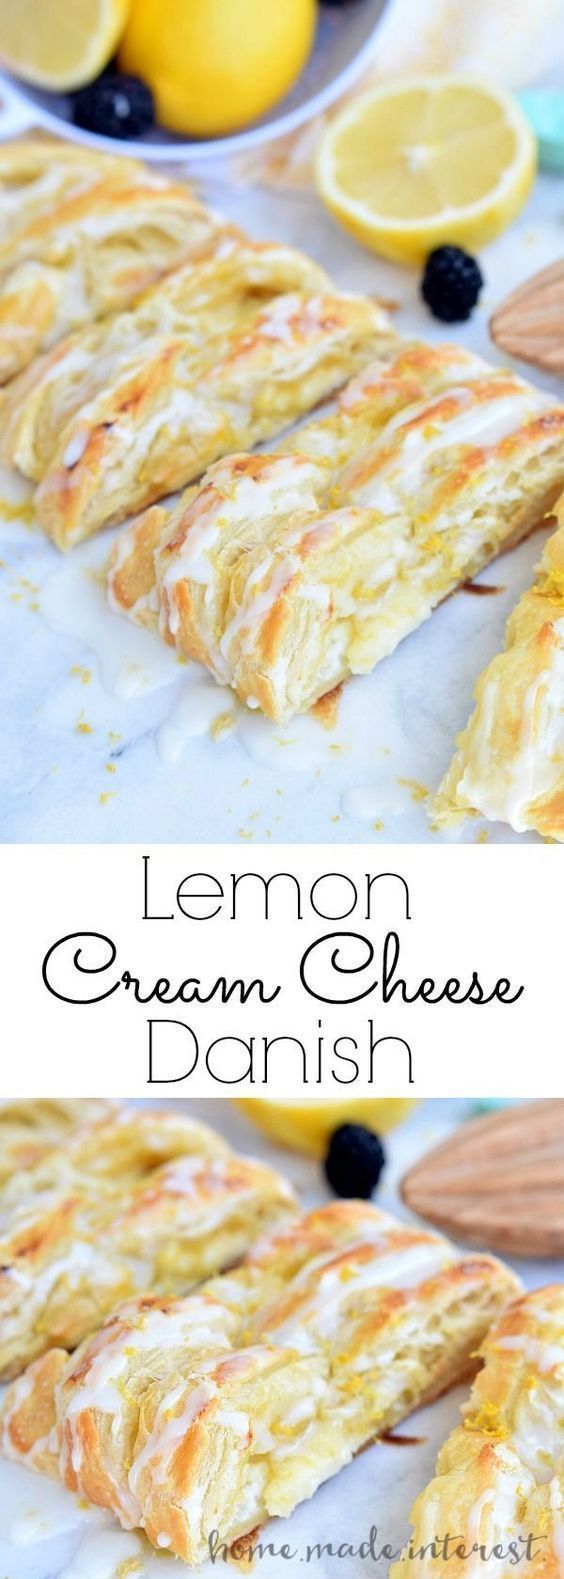 This flaky Lemon Cream Cheese Danish is an easy breakfast or brunch recipe made